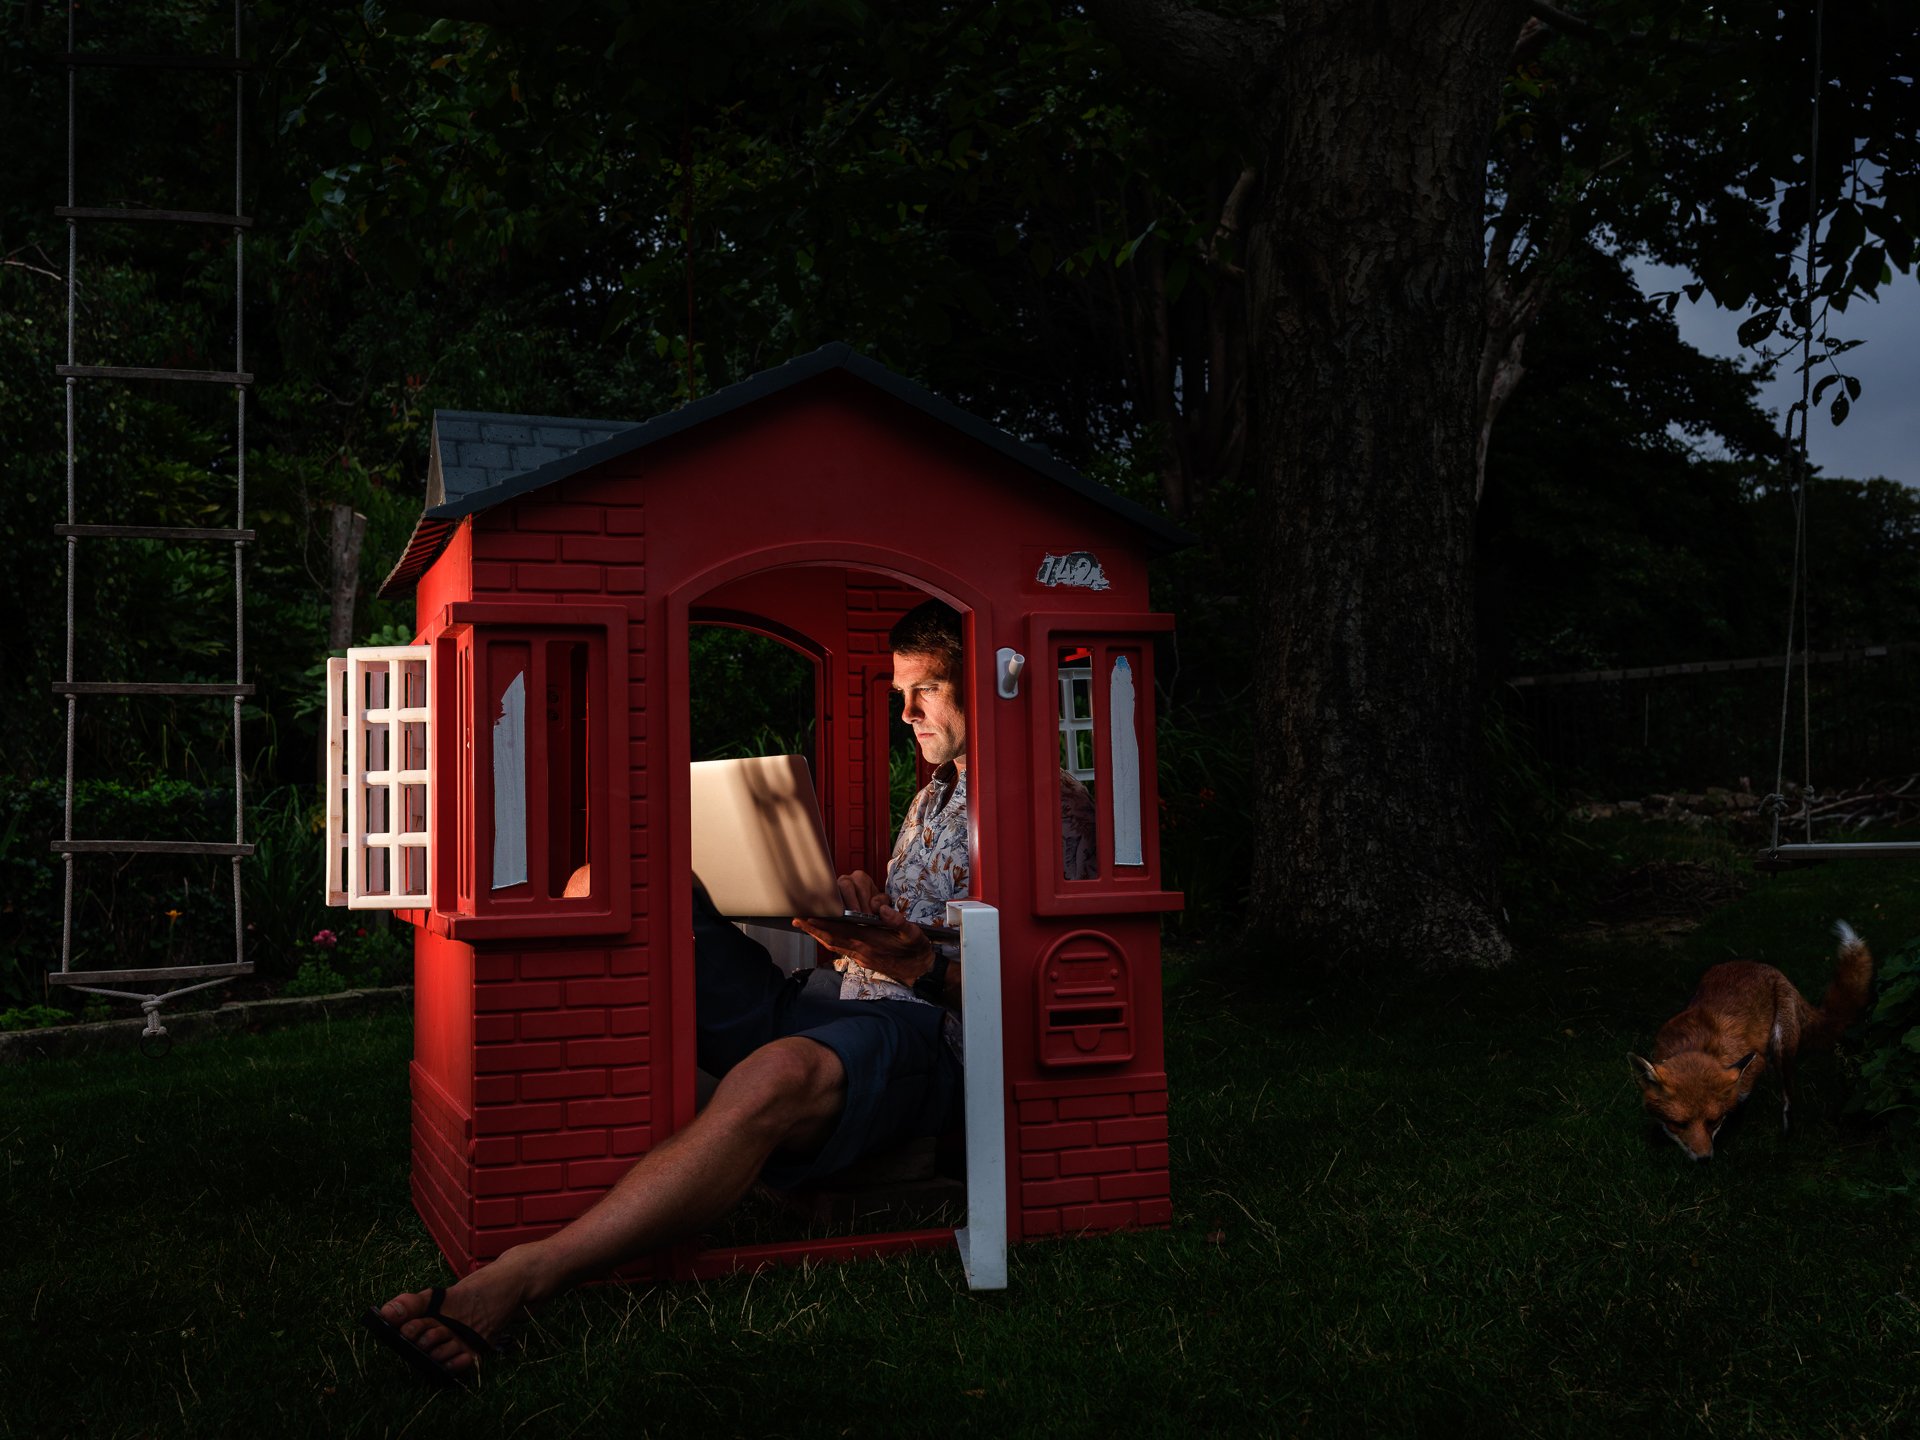 Lifestyle photo of man using laptop in child's toy house in garden at night